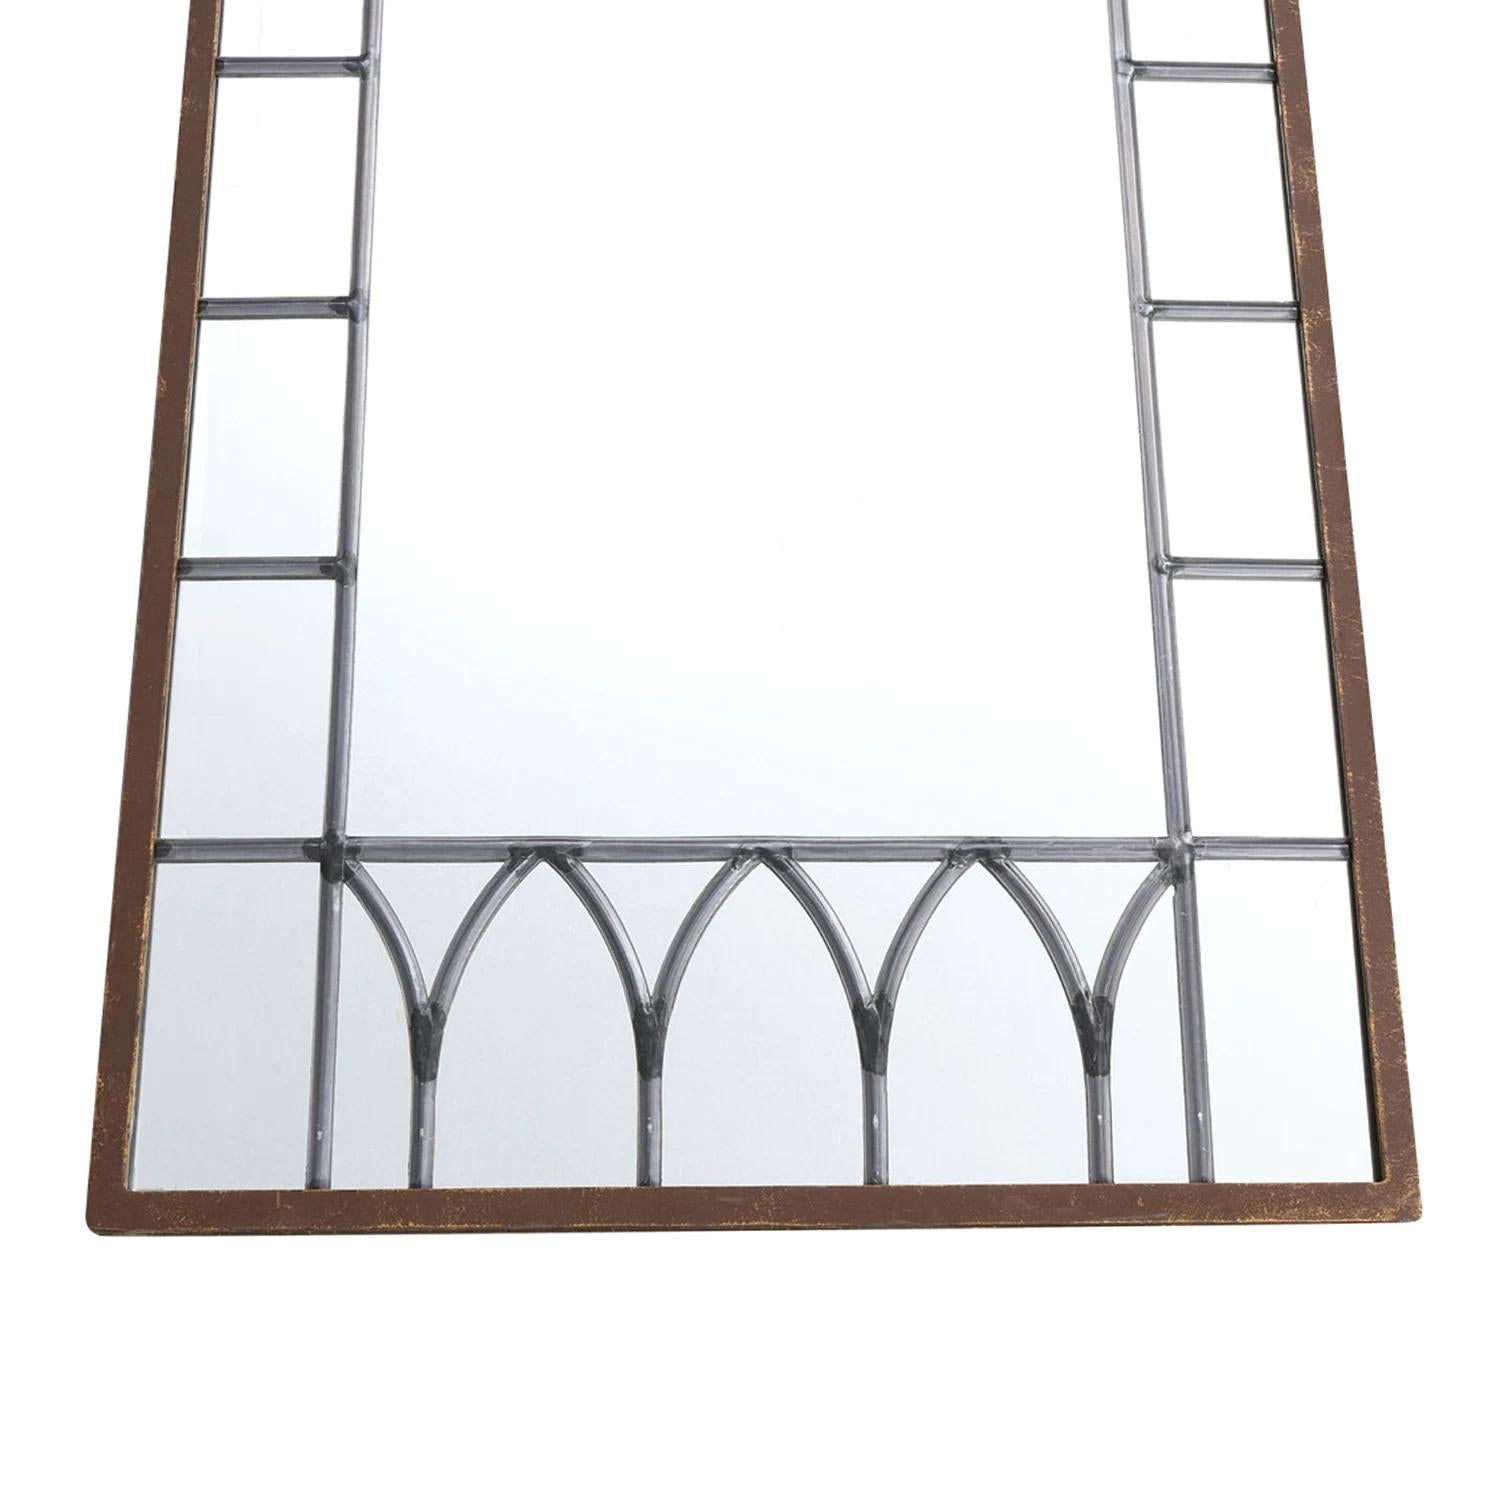 19th Century French Empire Pair of Metal Wall Glass Mirrors, Parisian Décor In Good Condition For Sale In West Palm Beach, FL